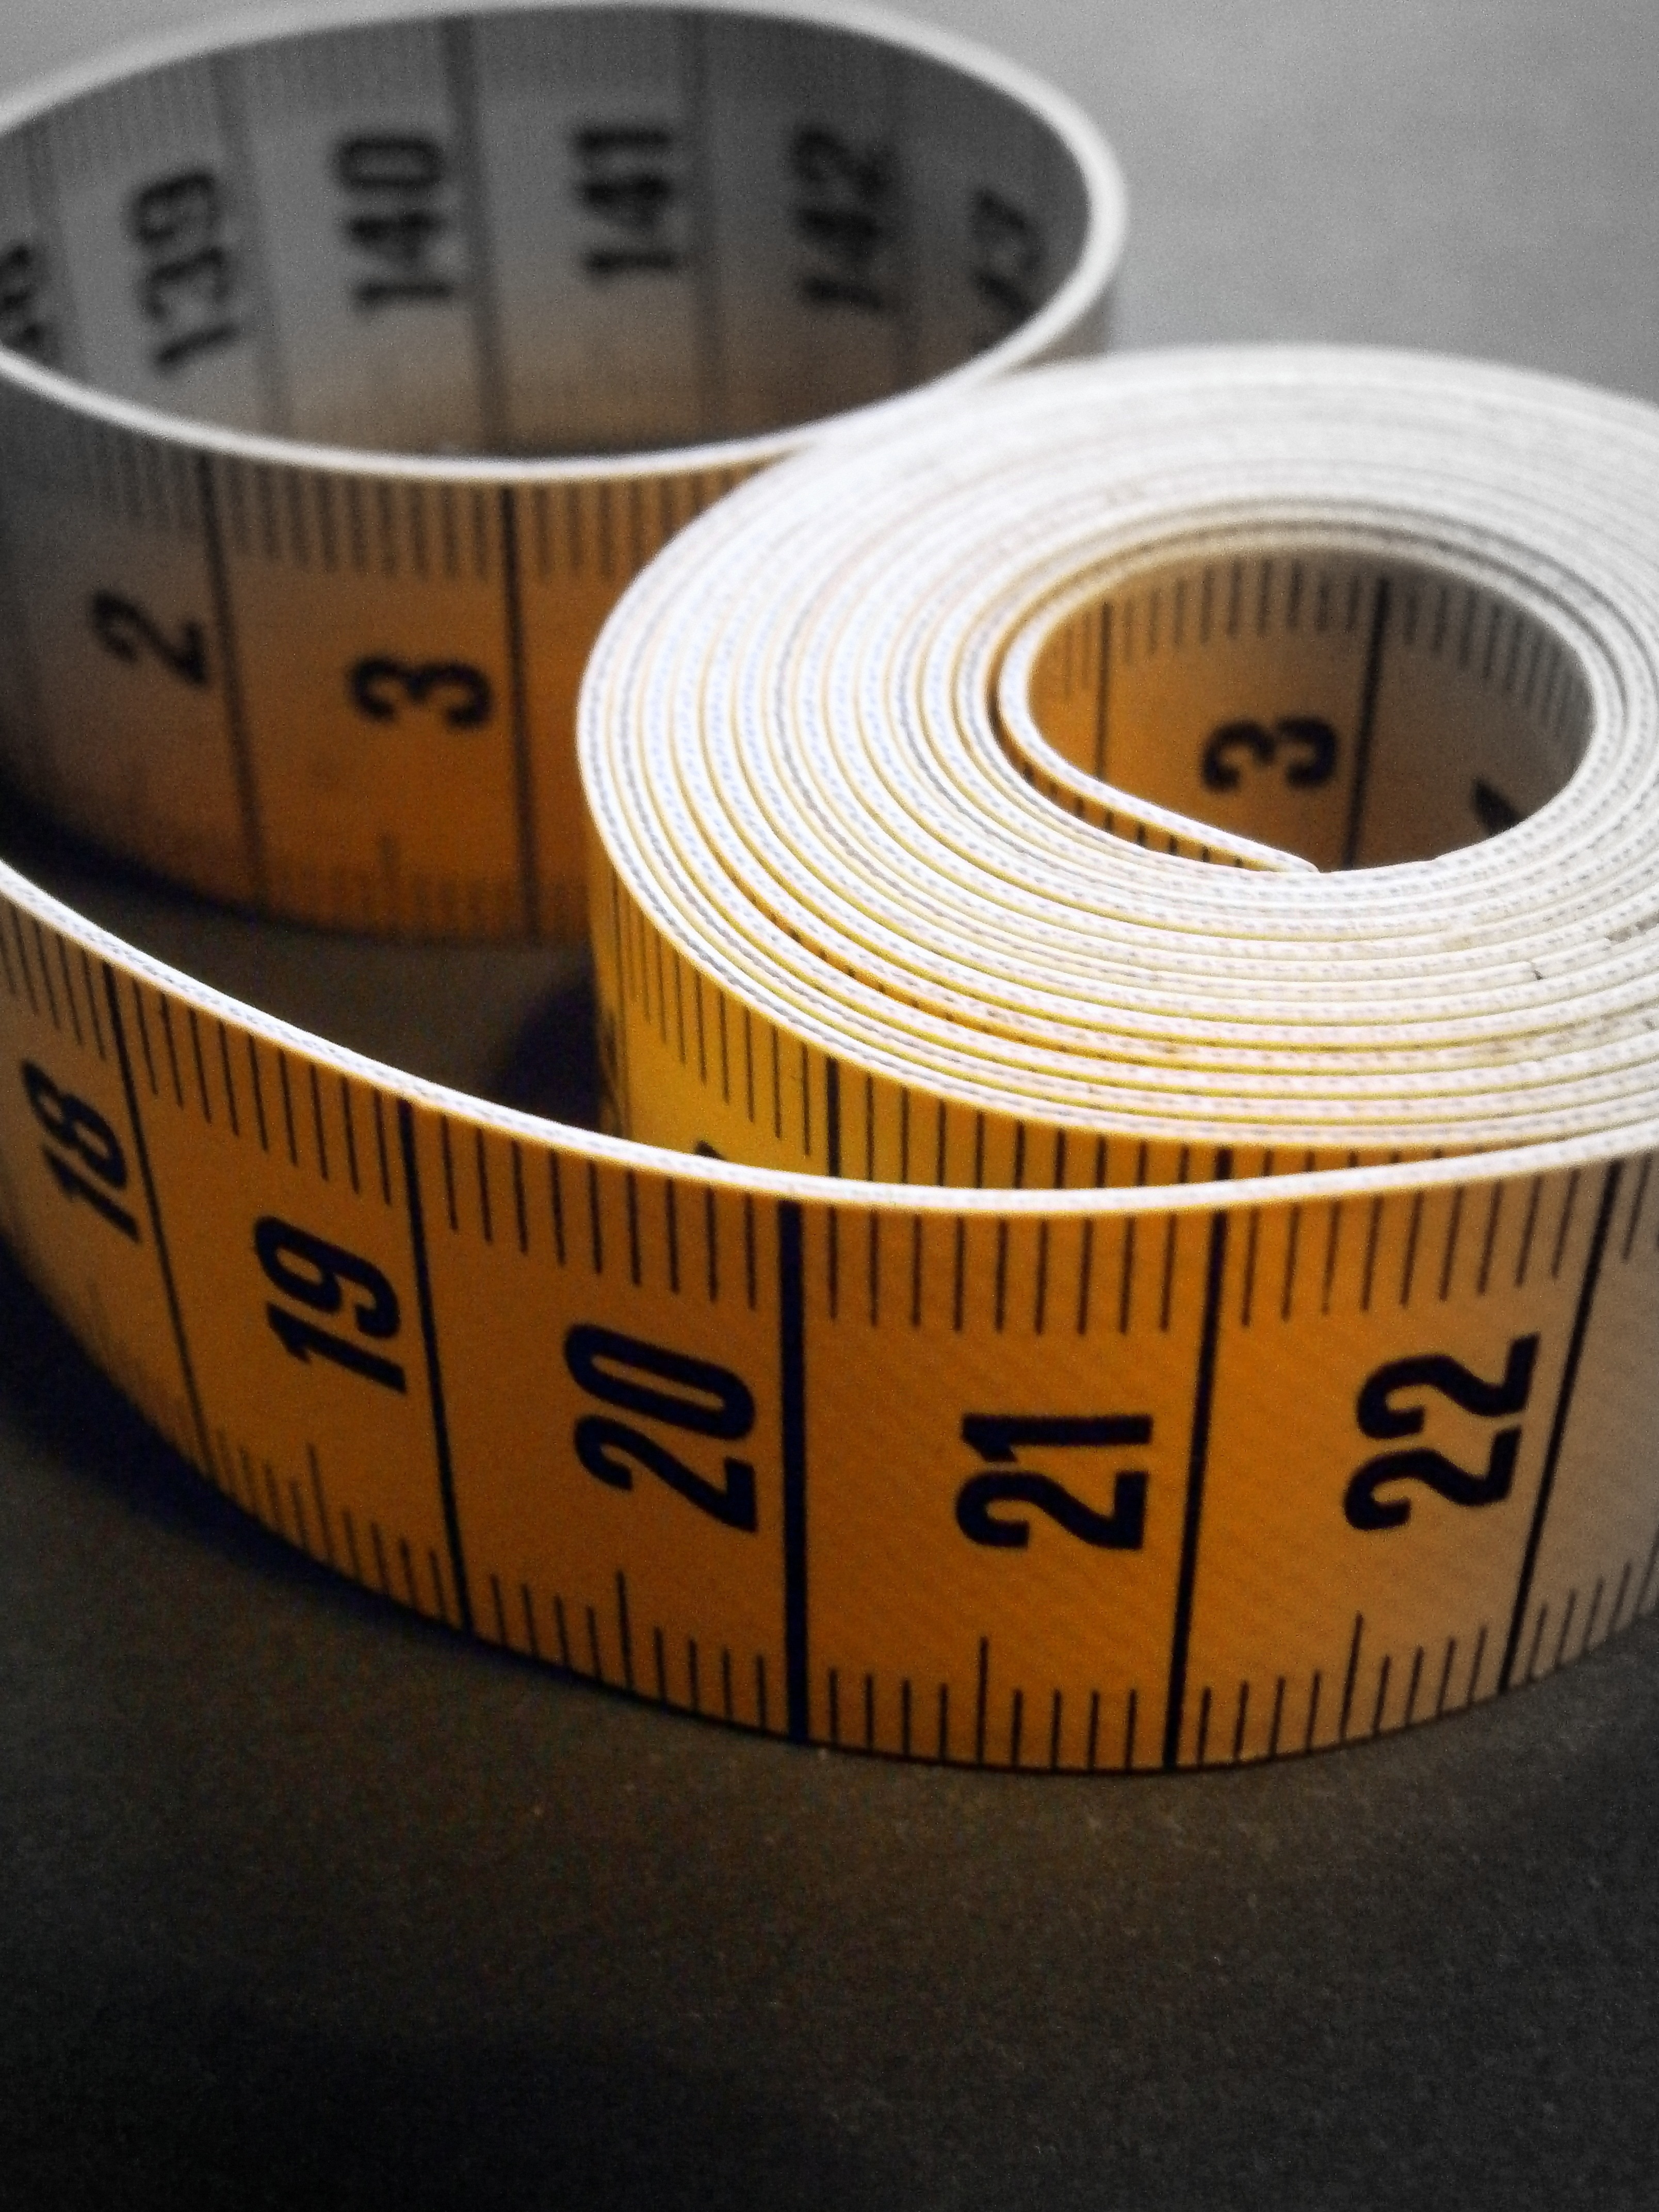 rolled measuring tape